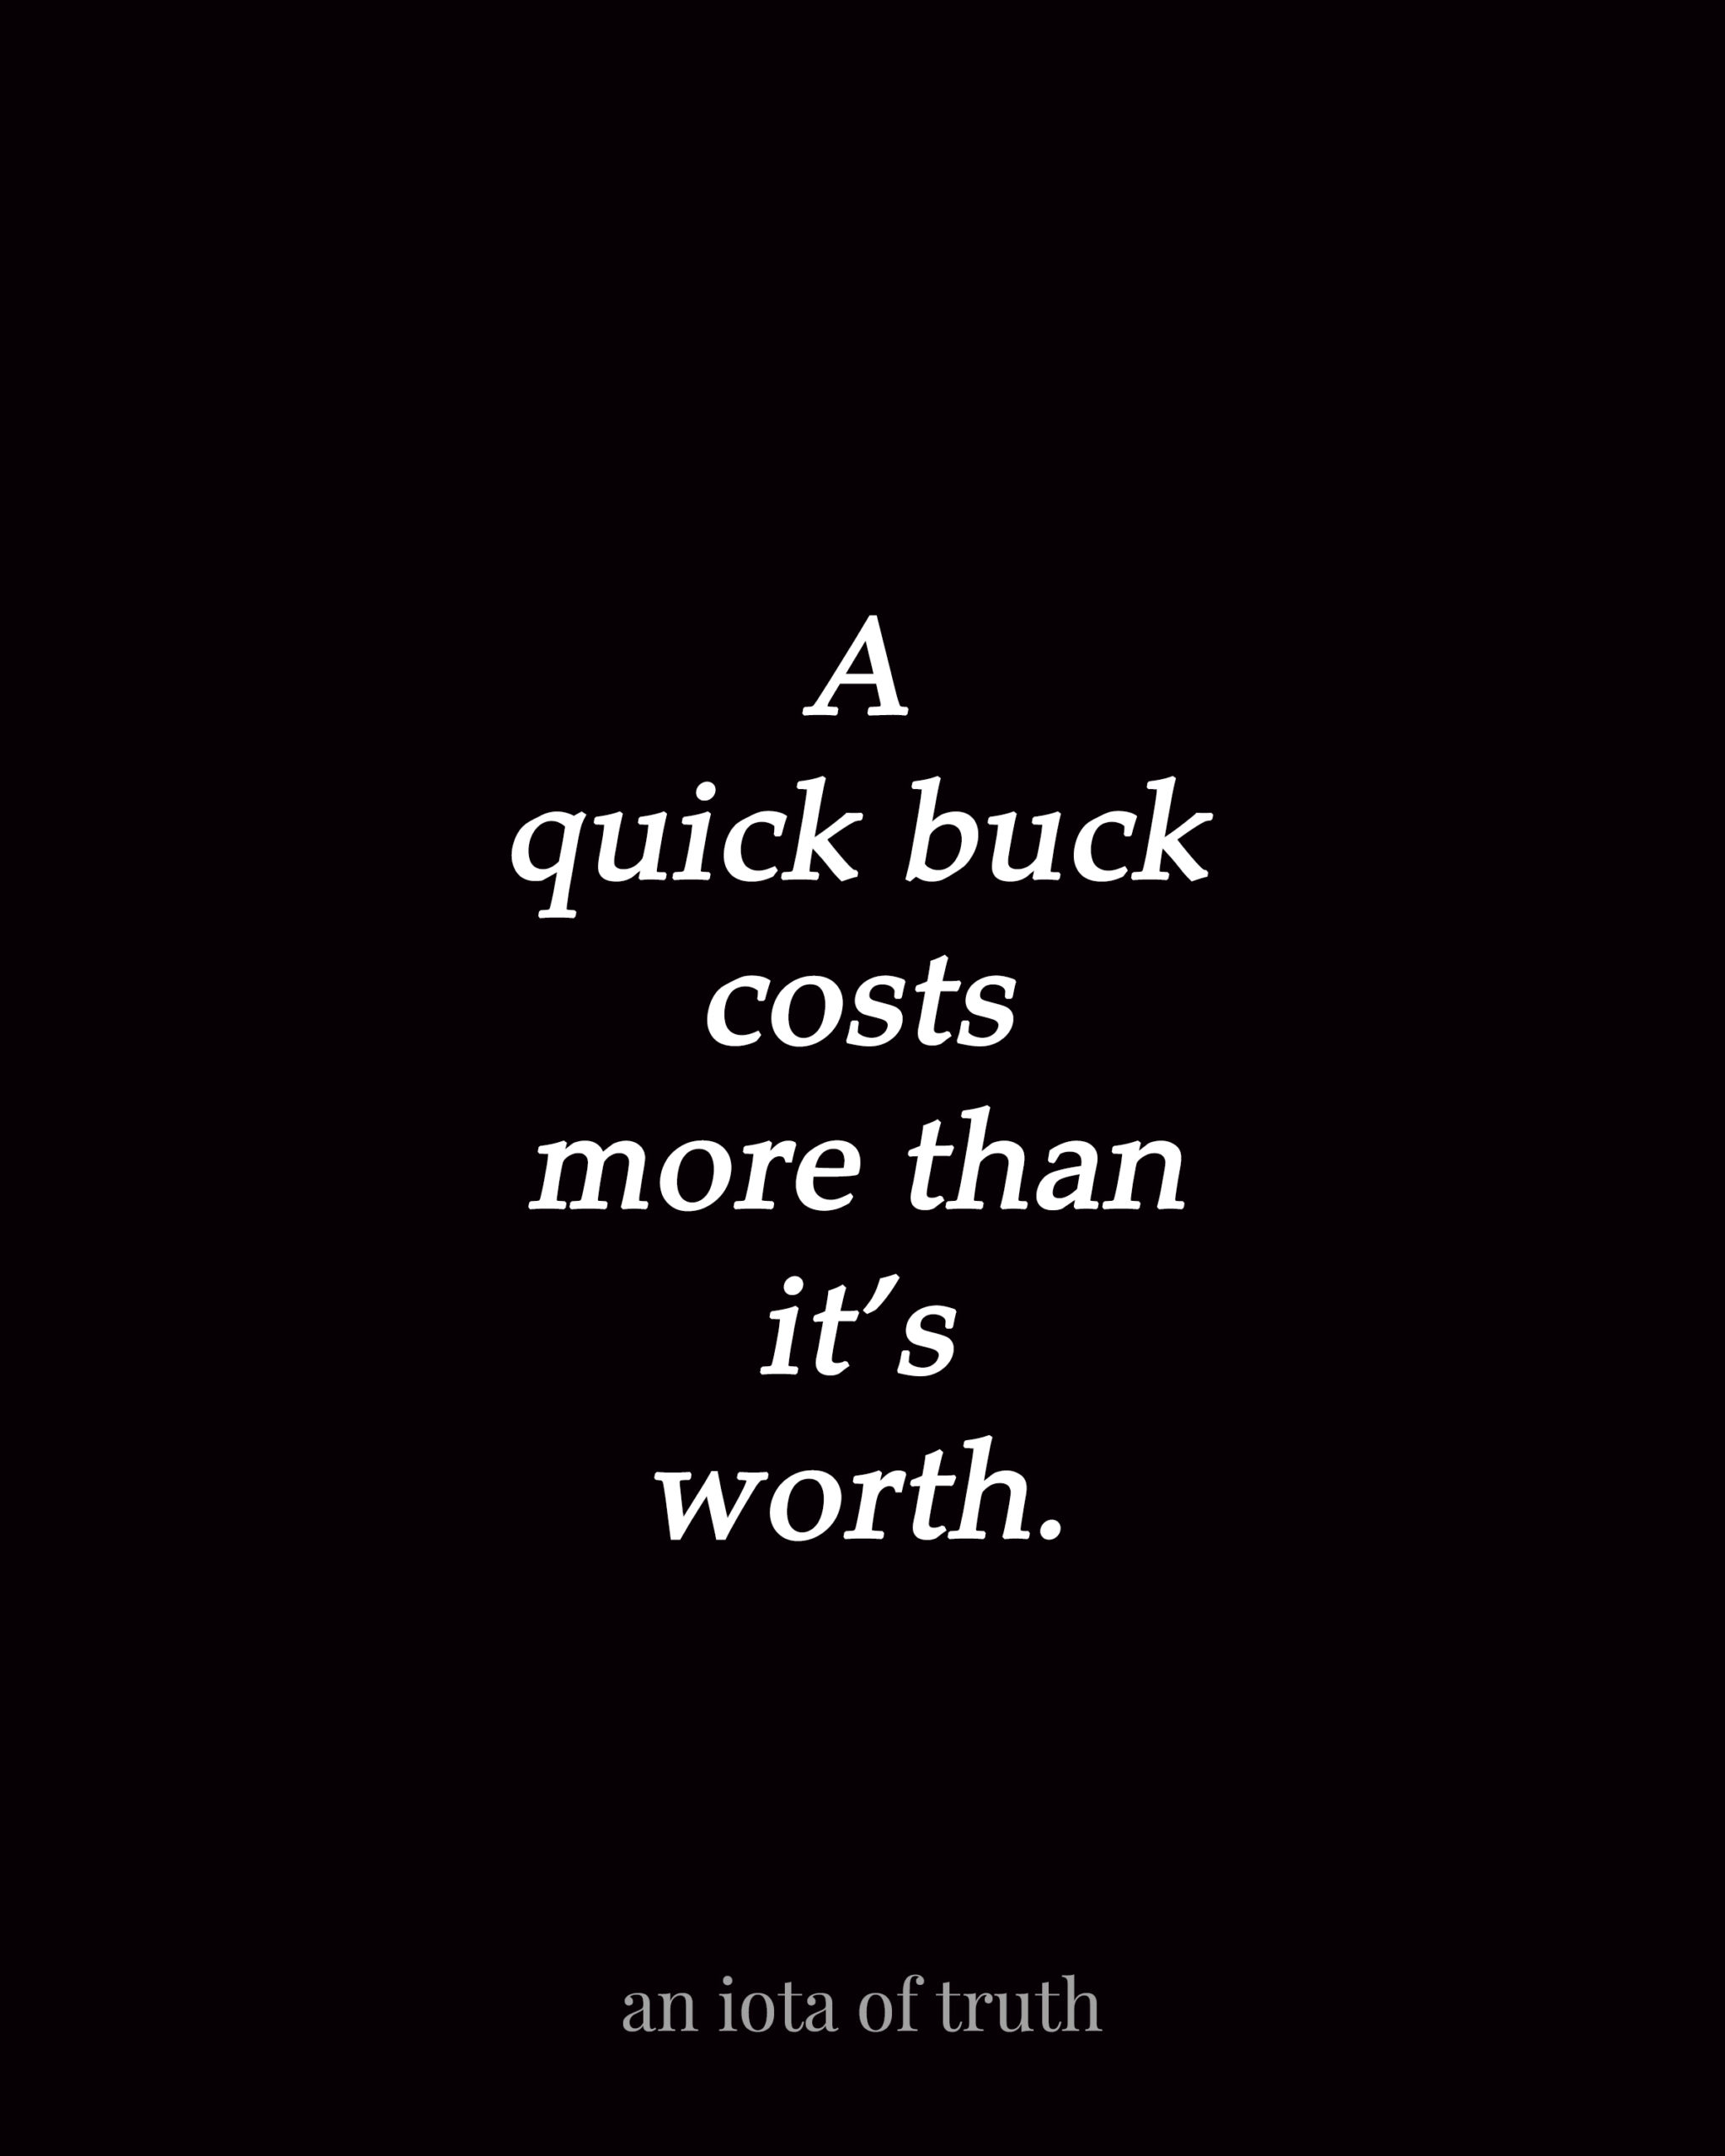 A quick buck costs more than it's worth.